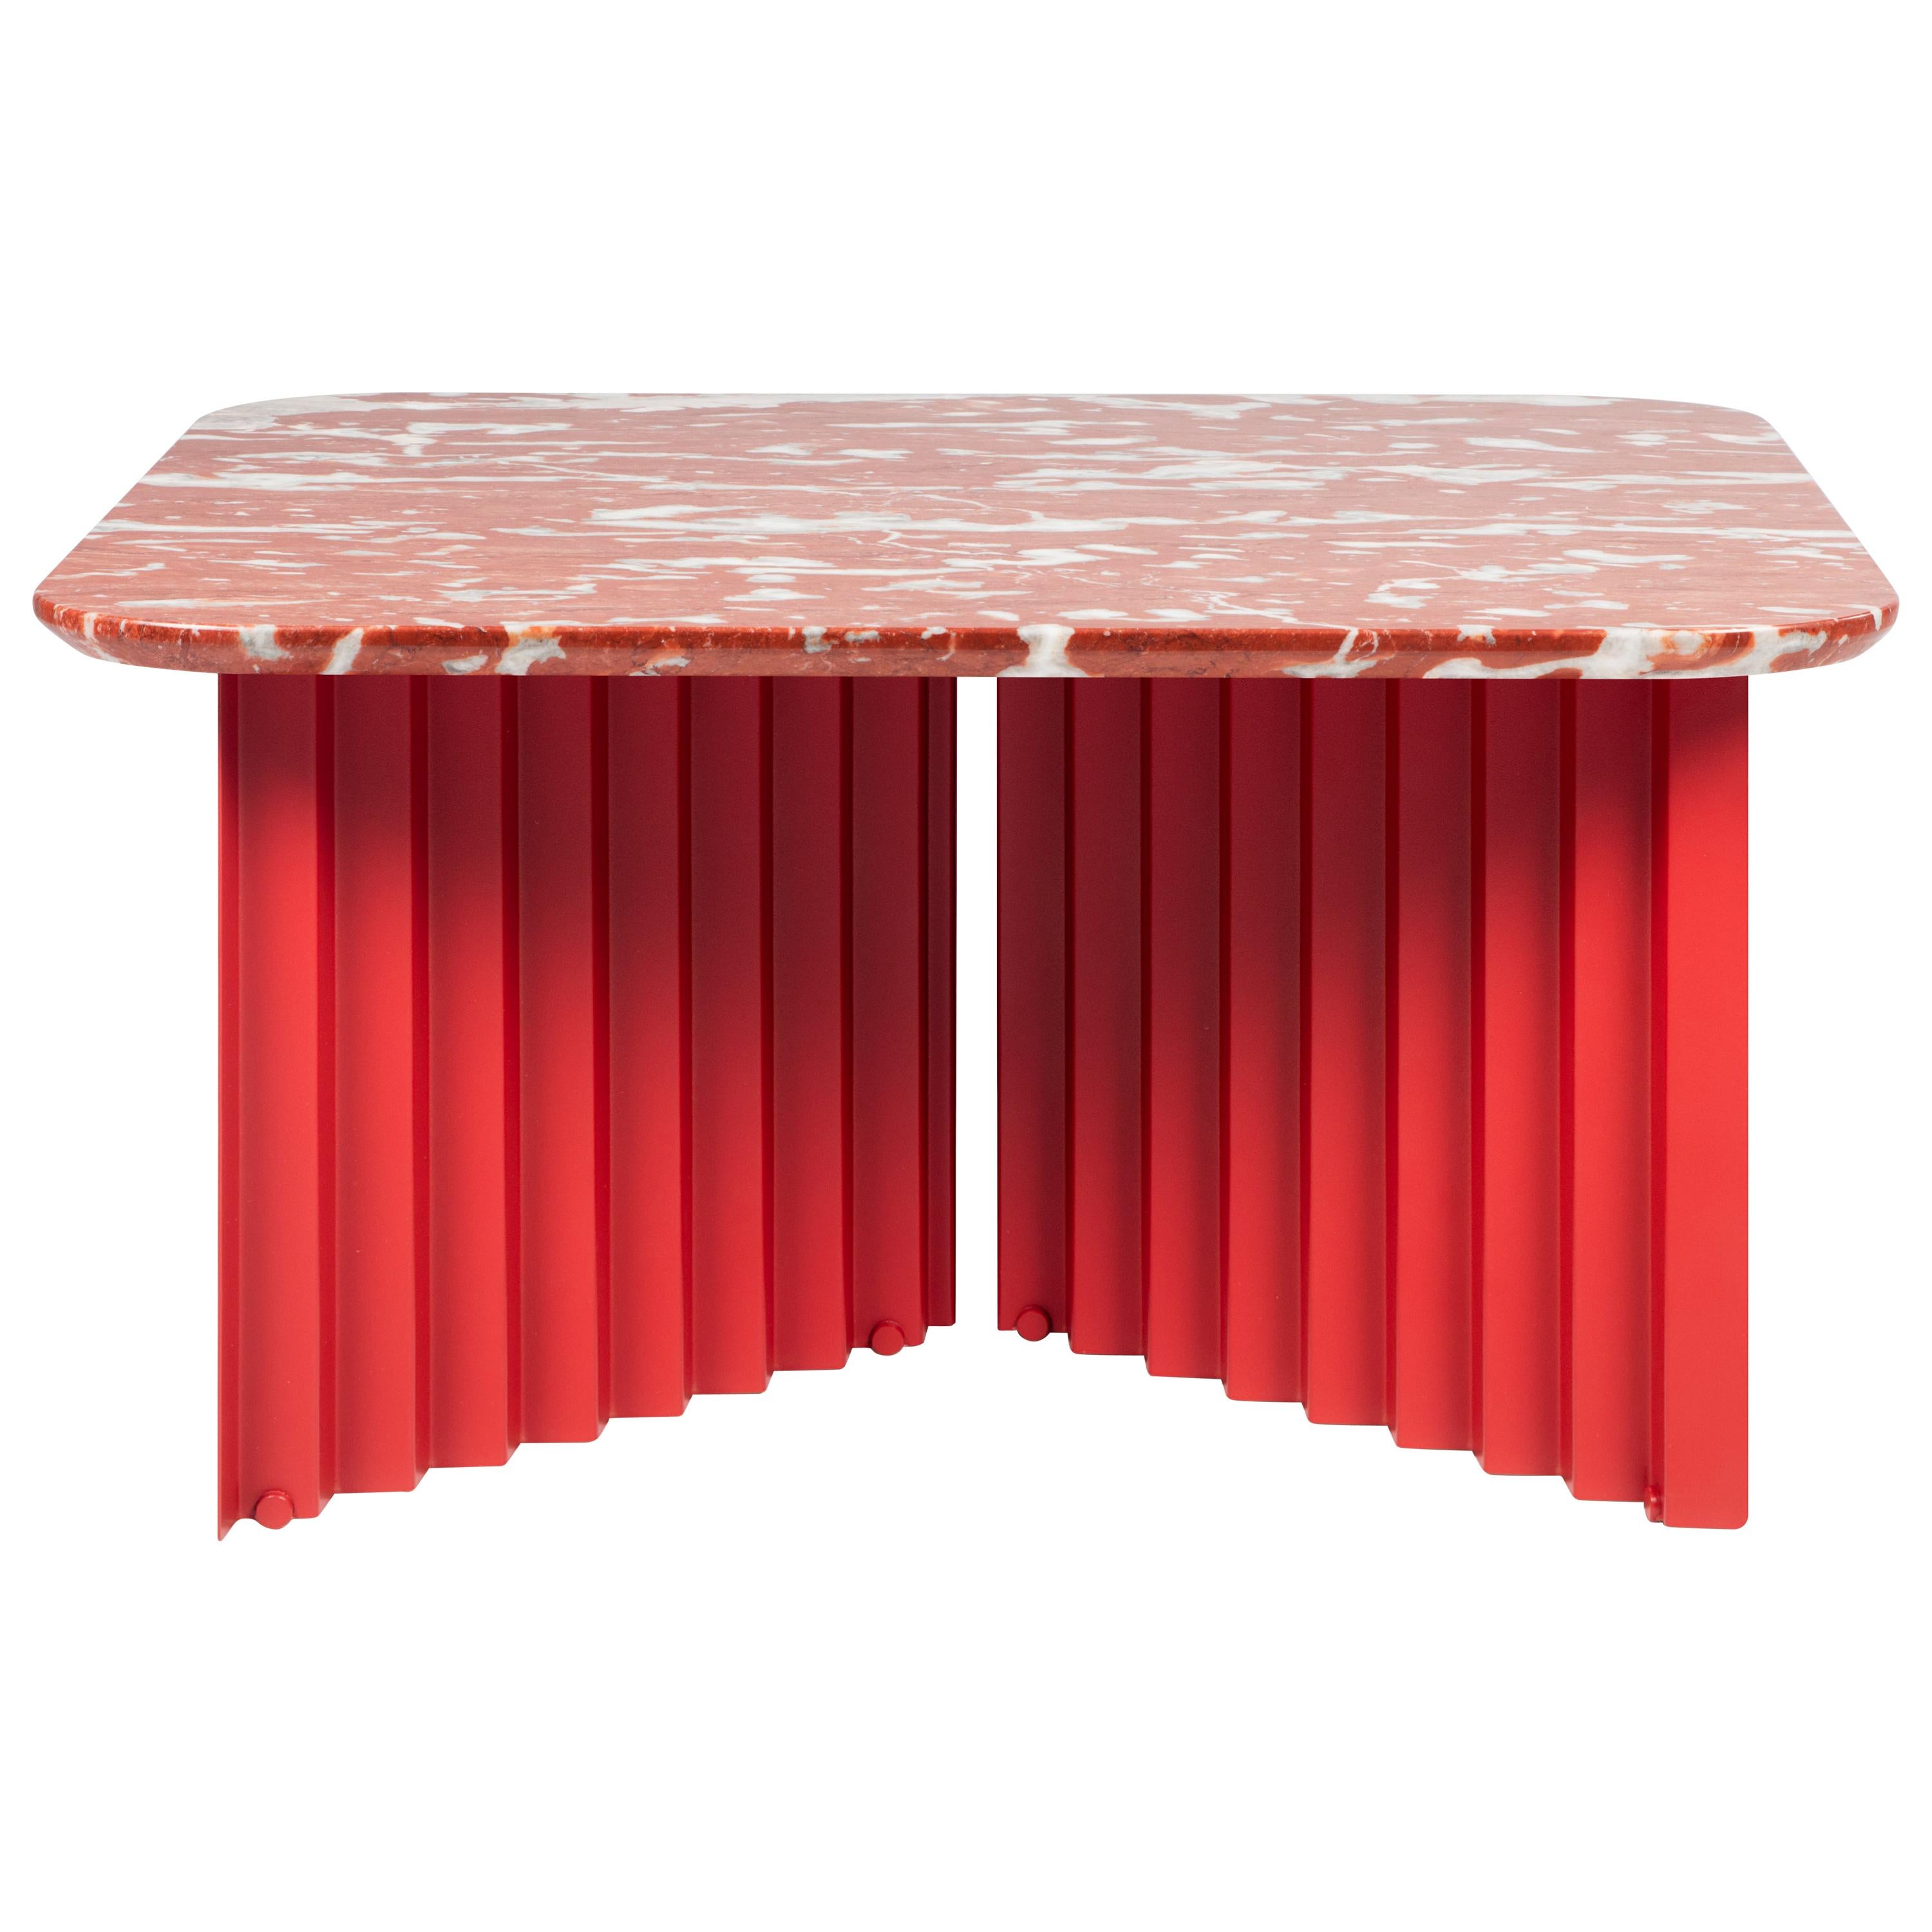 RS Barcelona Plec Medium Table in Red Marble by A.P.O. For Sale